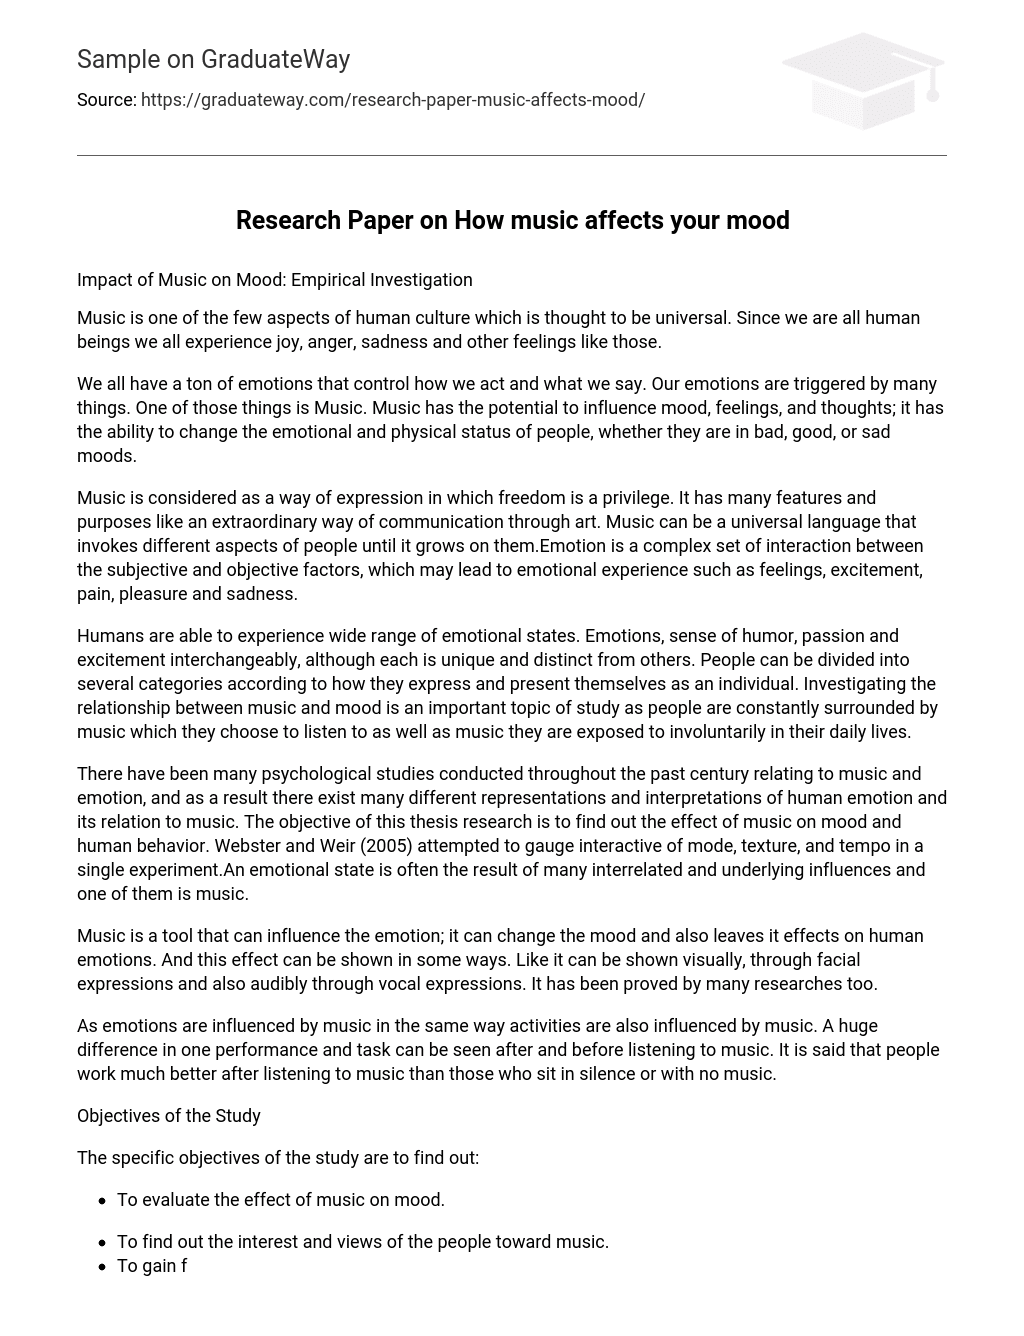 Research Paper on How music affects your mood